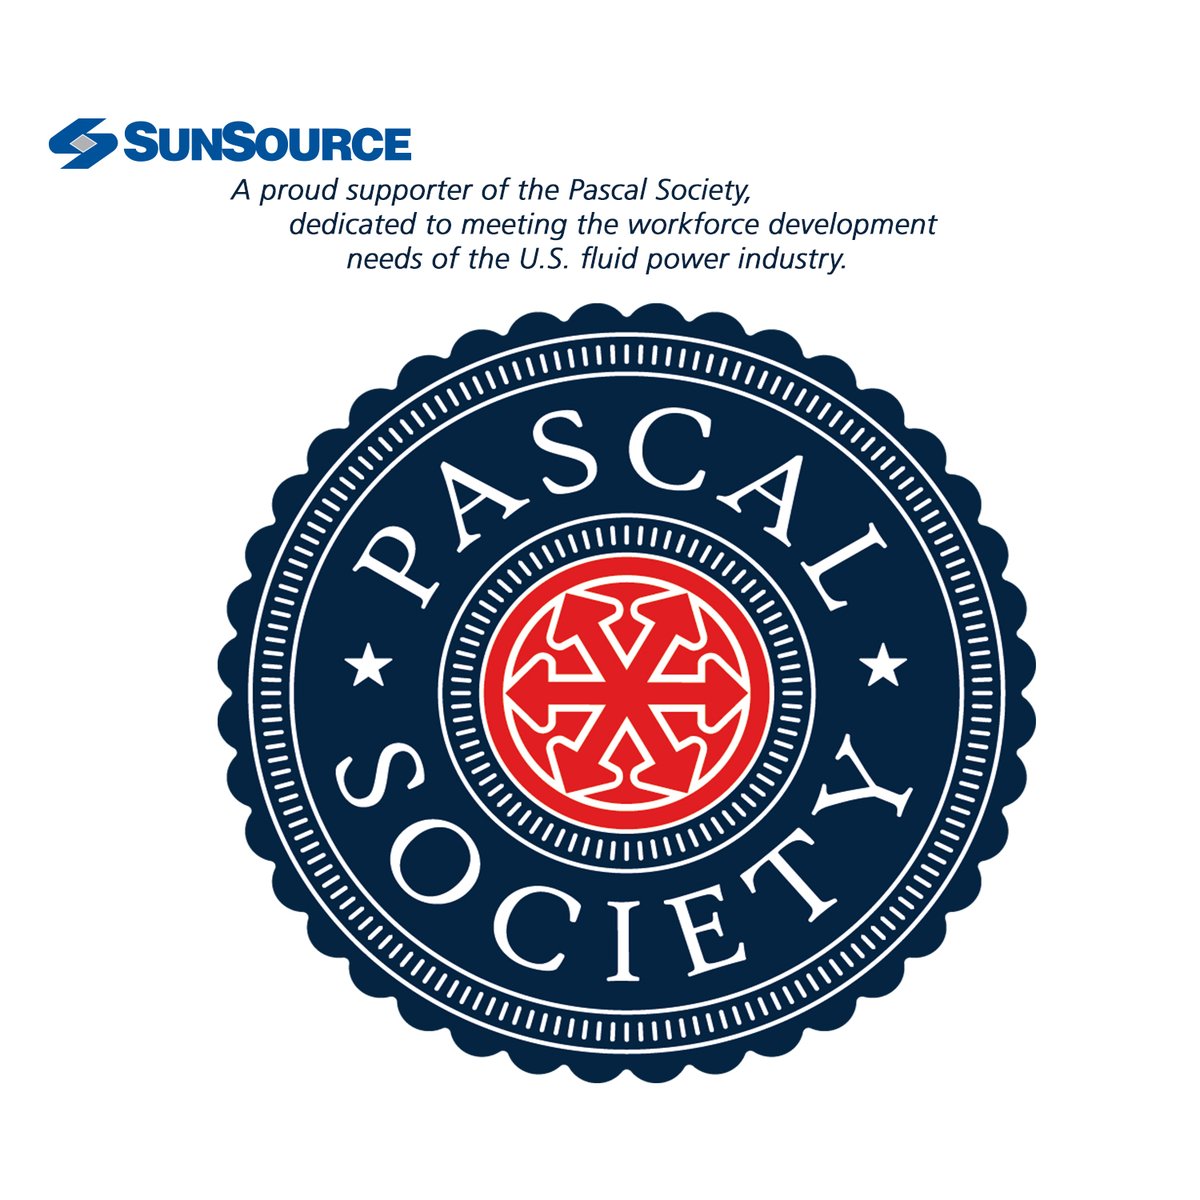 🏁 @SunSourceHyd is proud to support the Pascal Society and @TheNFPA EDUCATION AND TECHNOLOGY FOUNDATION! We are committed to helping the fluid power industry meet demands of the future by supporting the Society to develop the resources needed to tackle the workforce development.